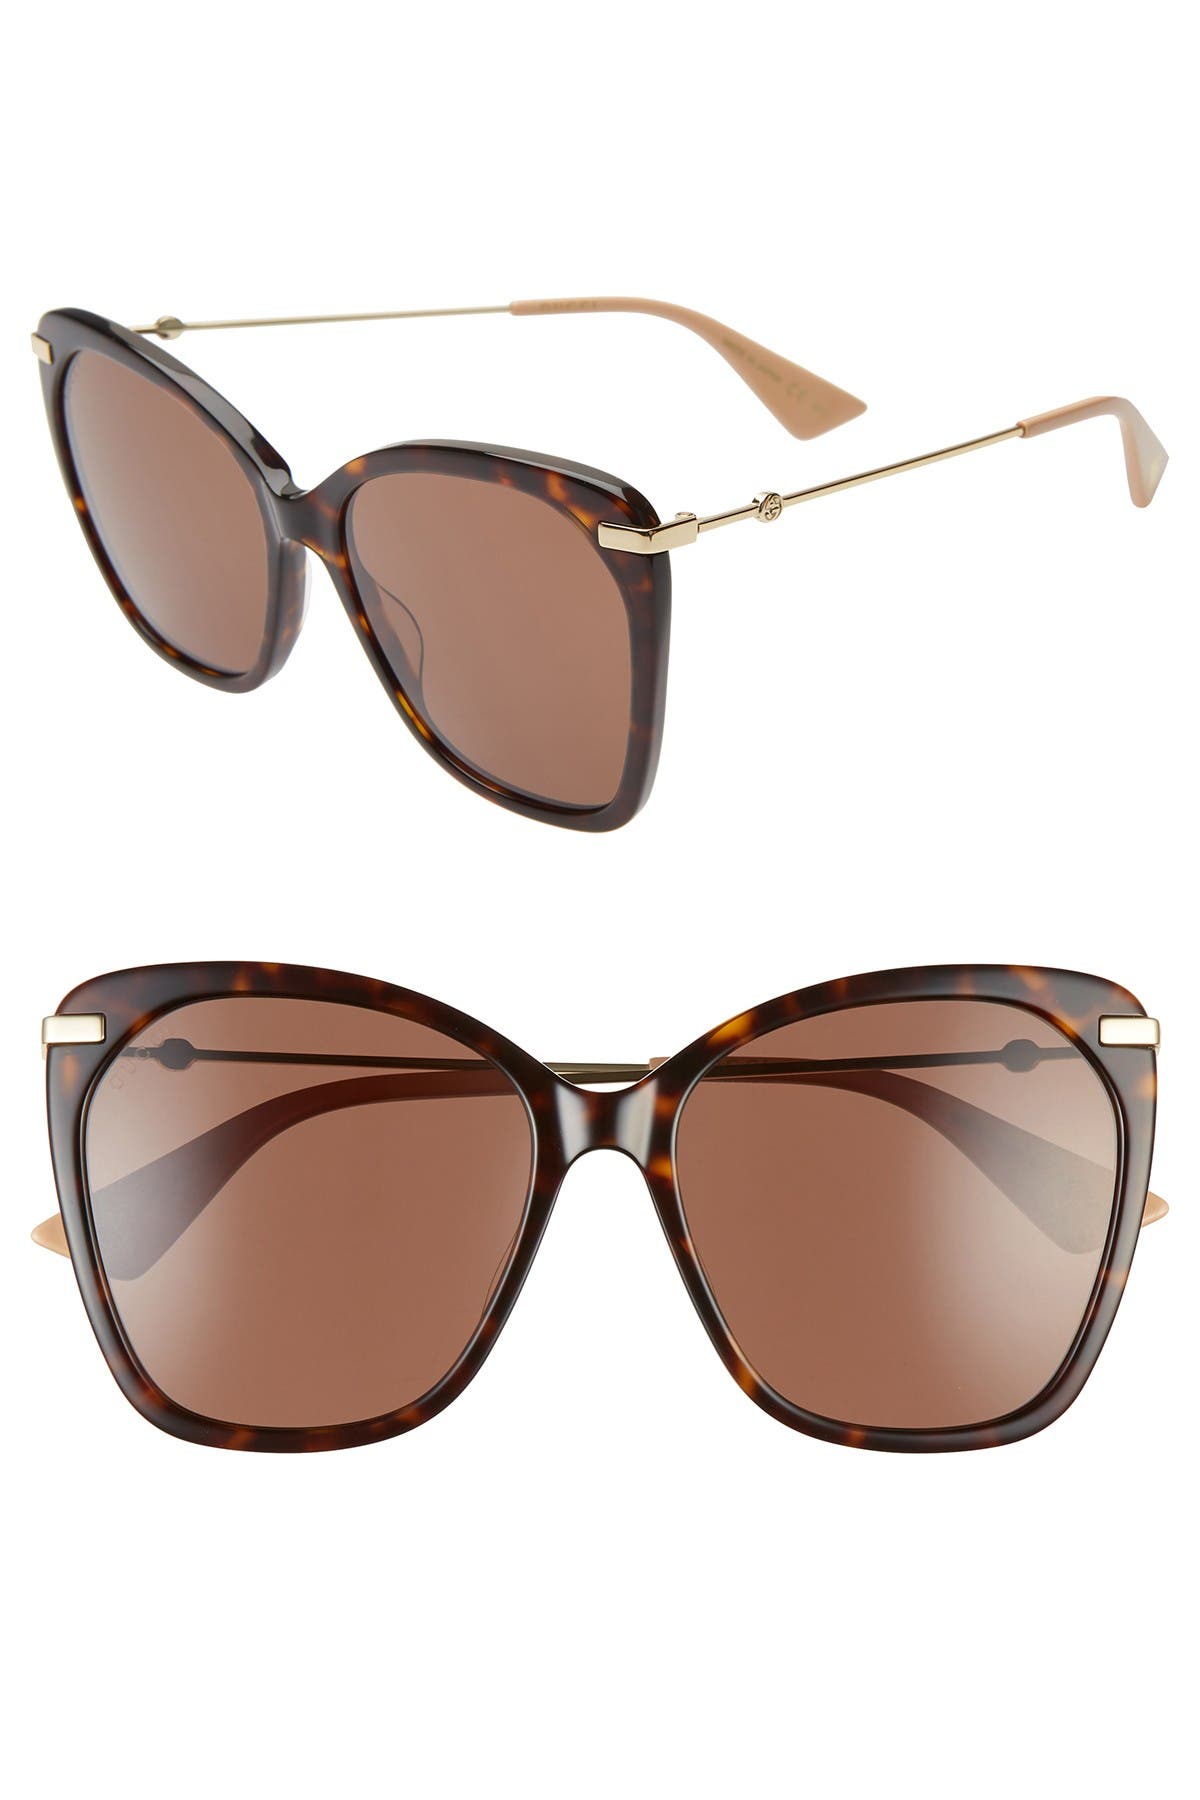 GUCCI | 56mm Butterfly Sunglasses 